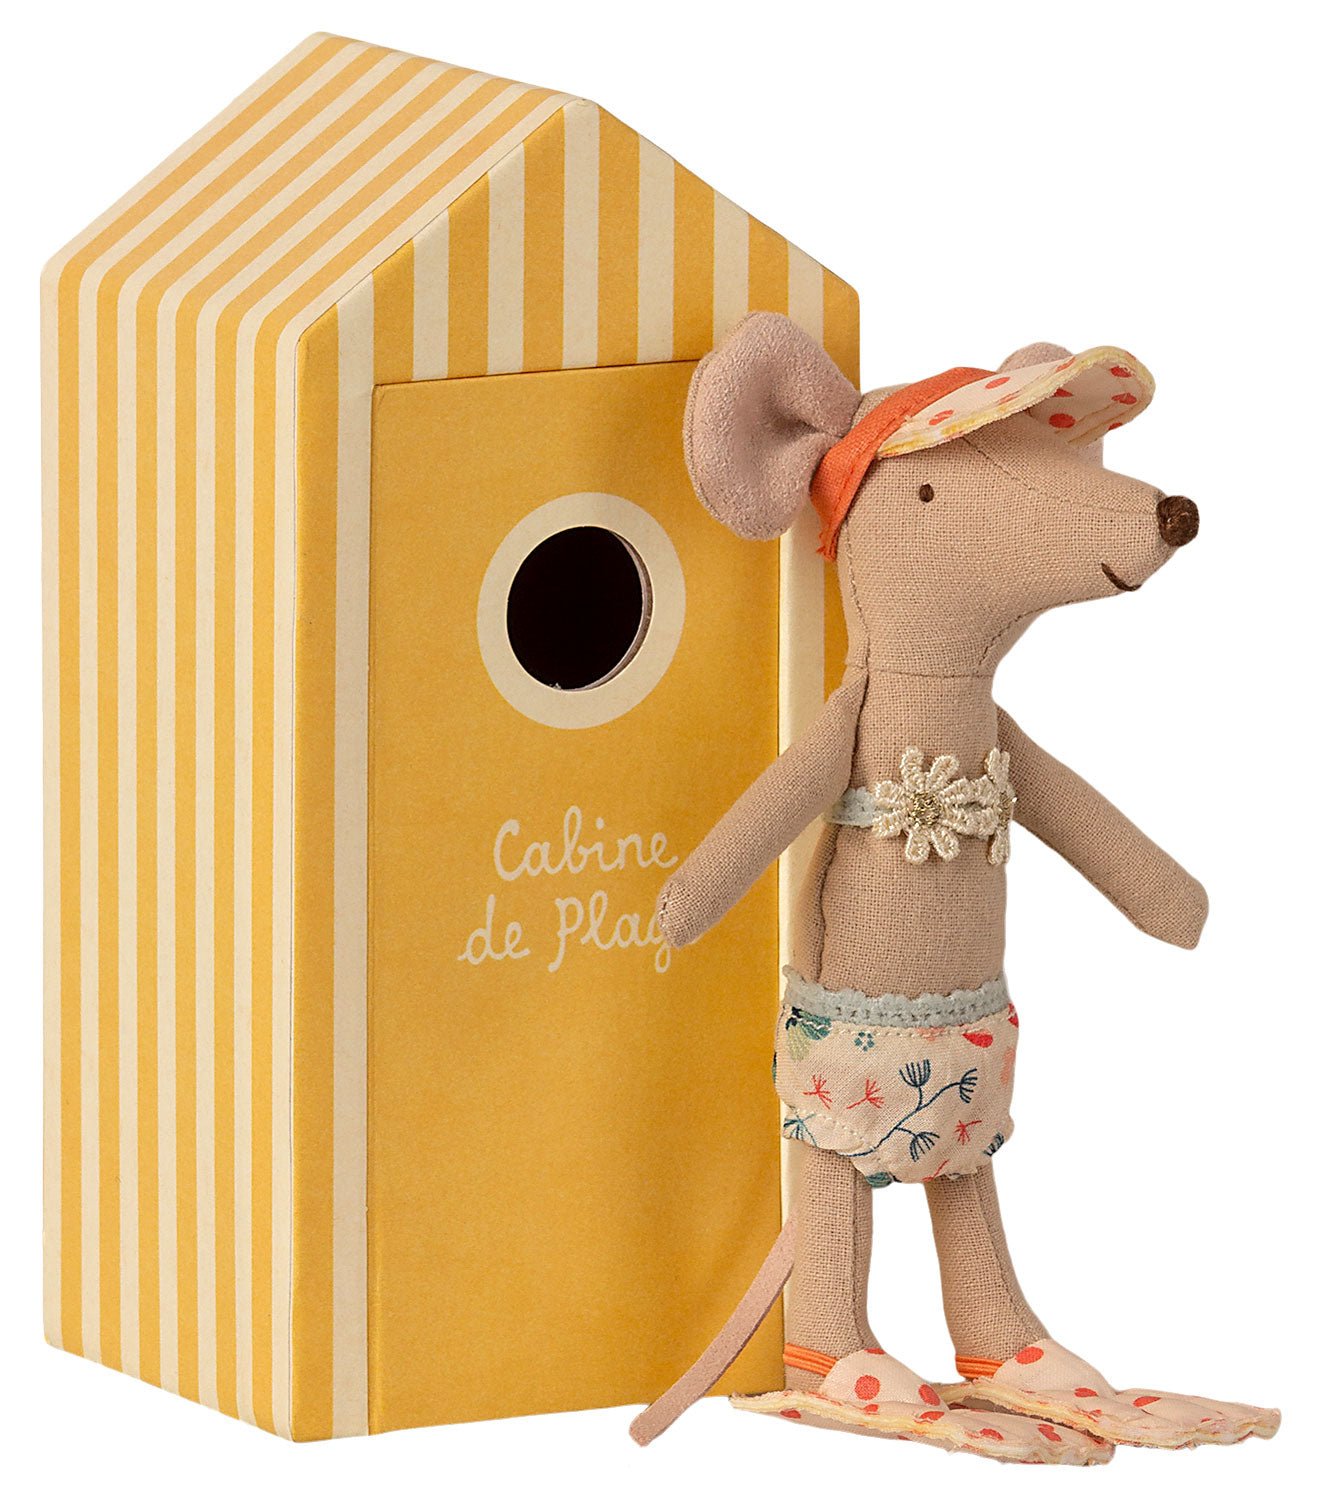 Maileg Big Sister Beach Mouse in Cabin de Plage